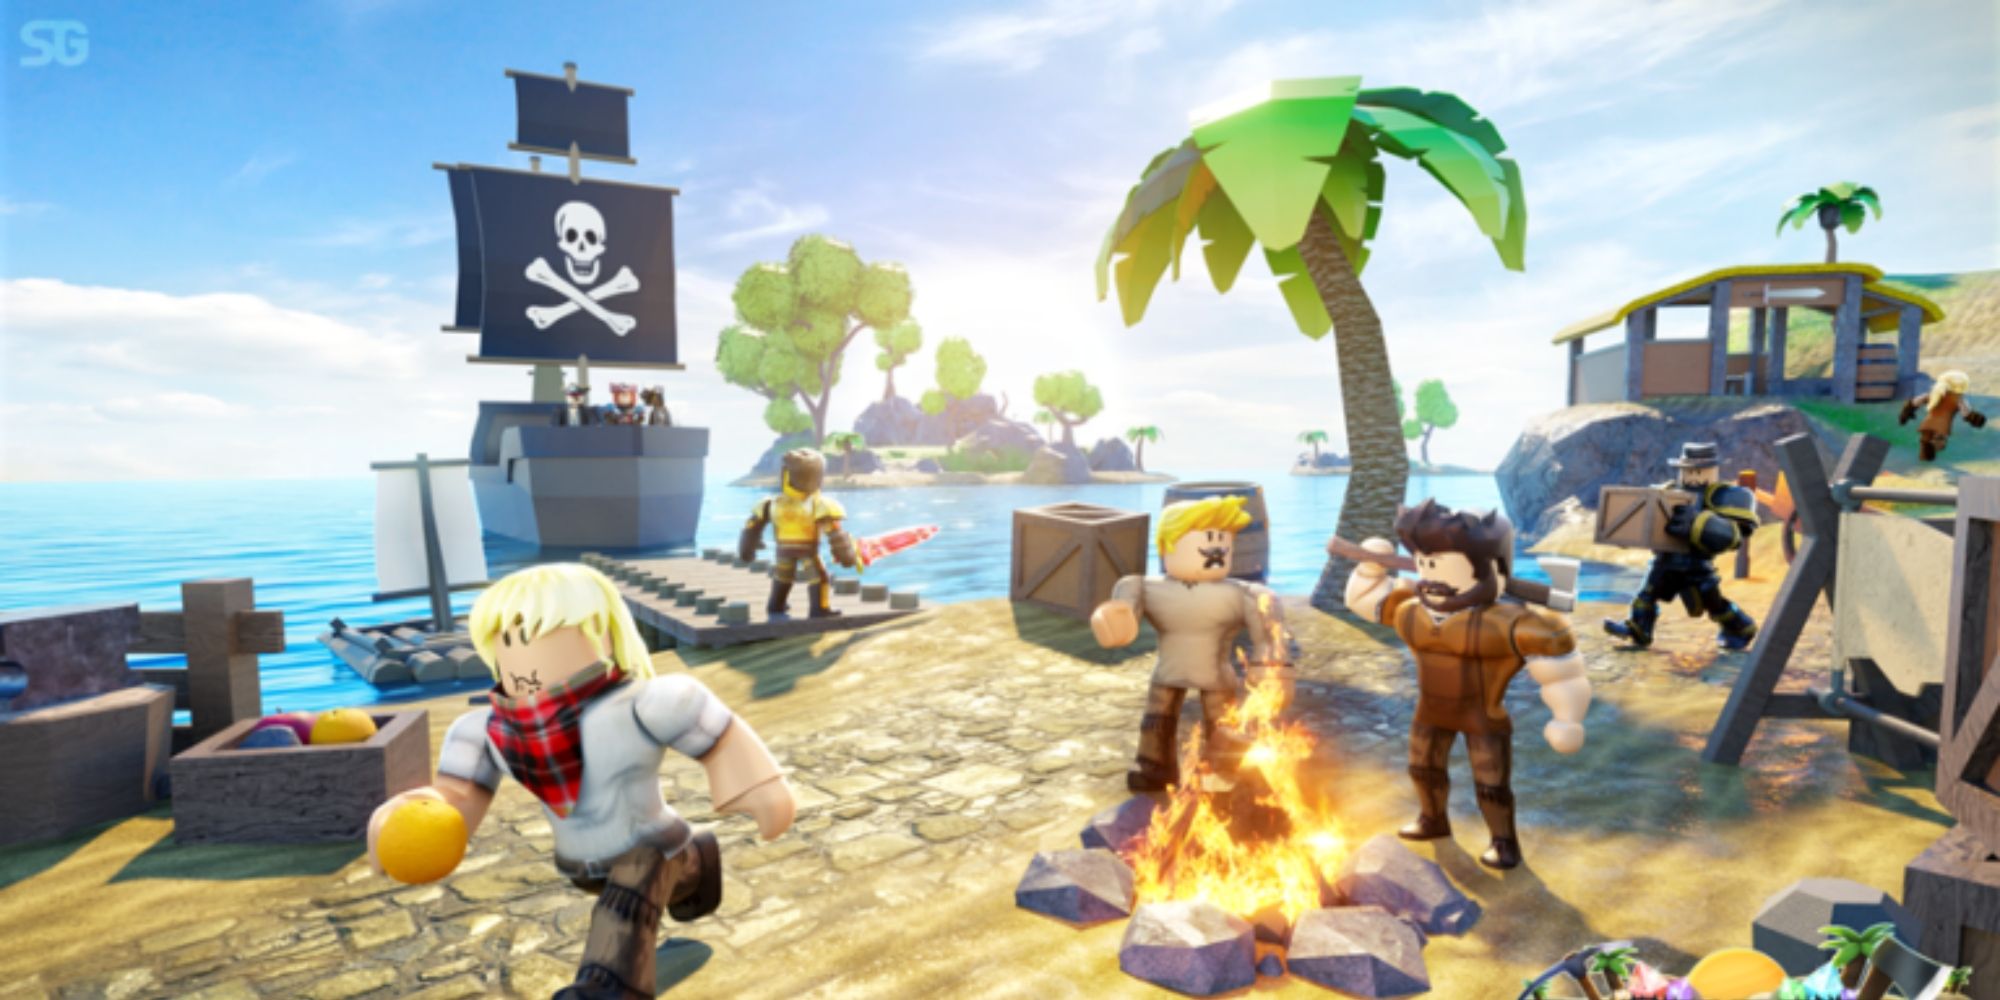 Roblox Castaway island with people moving about